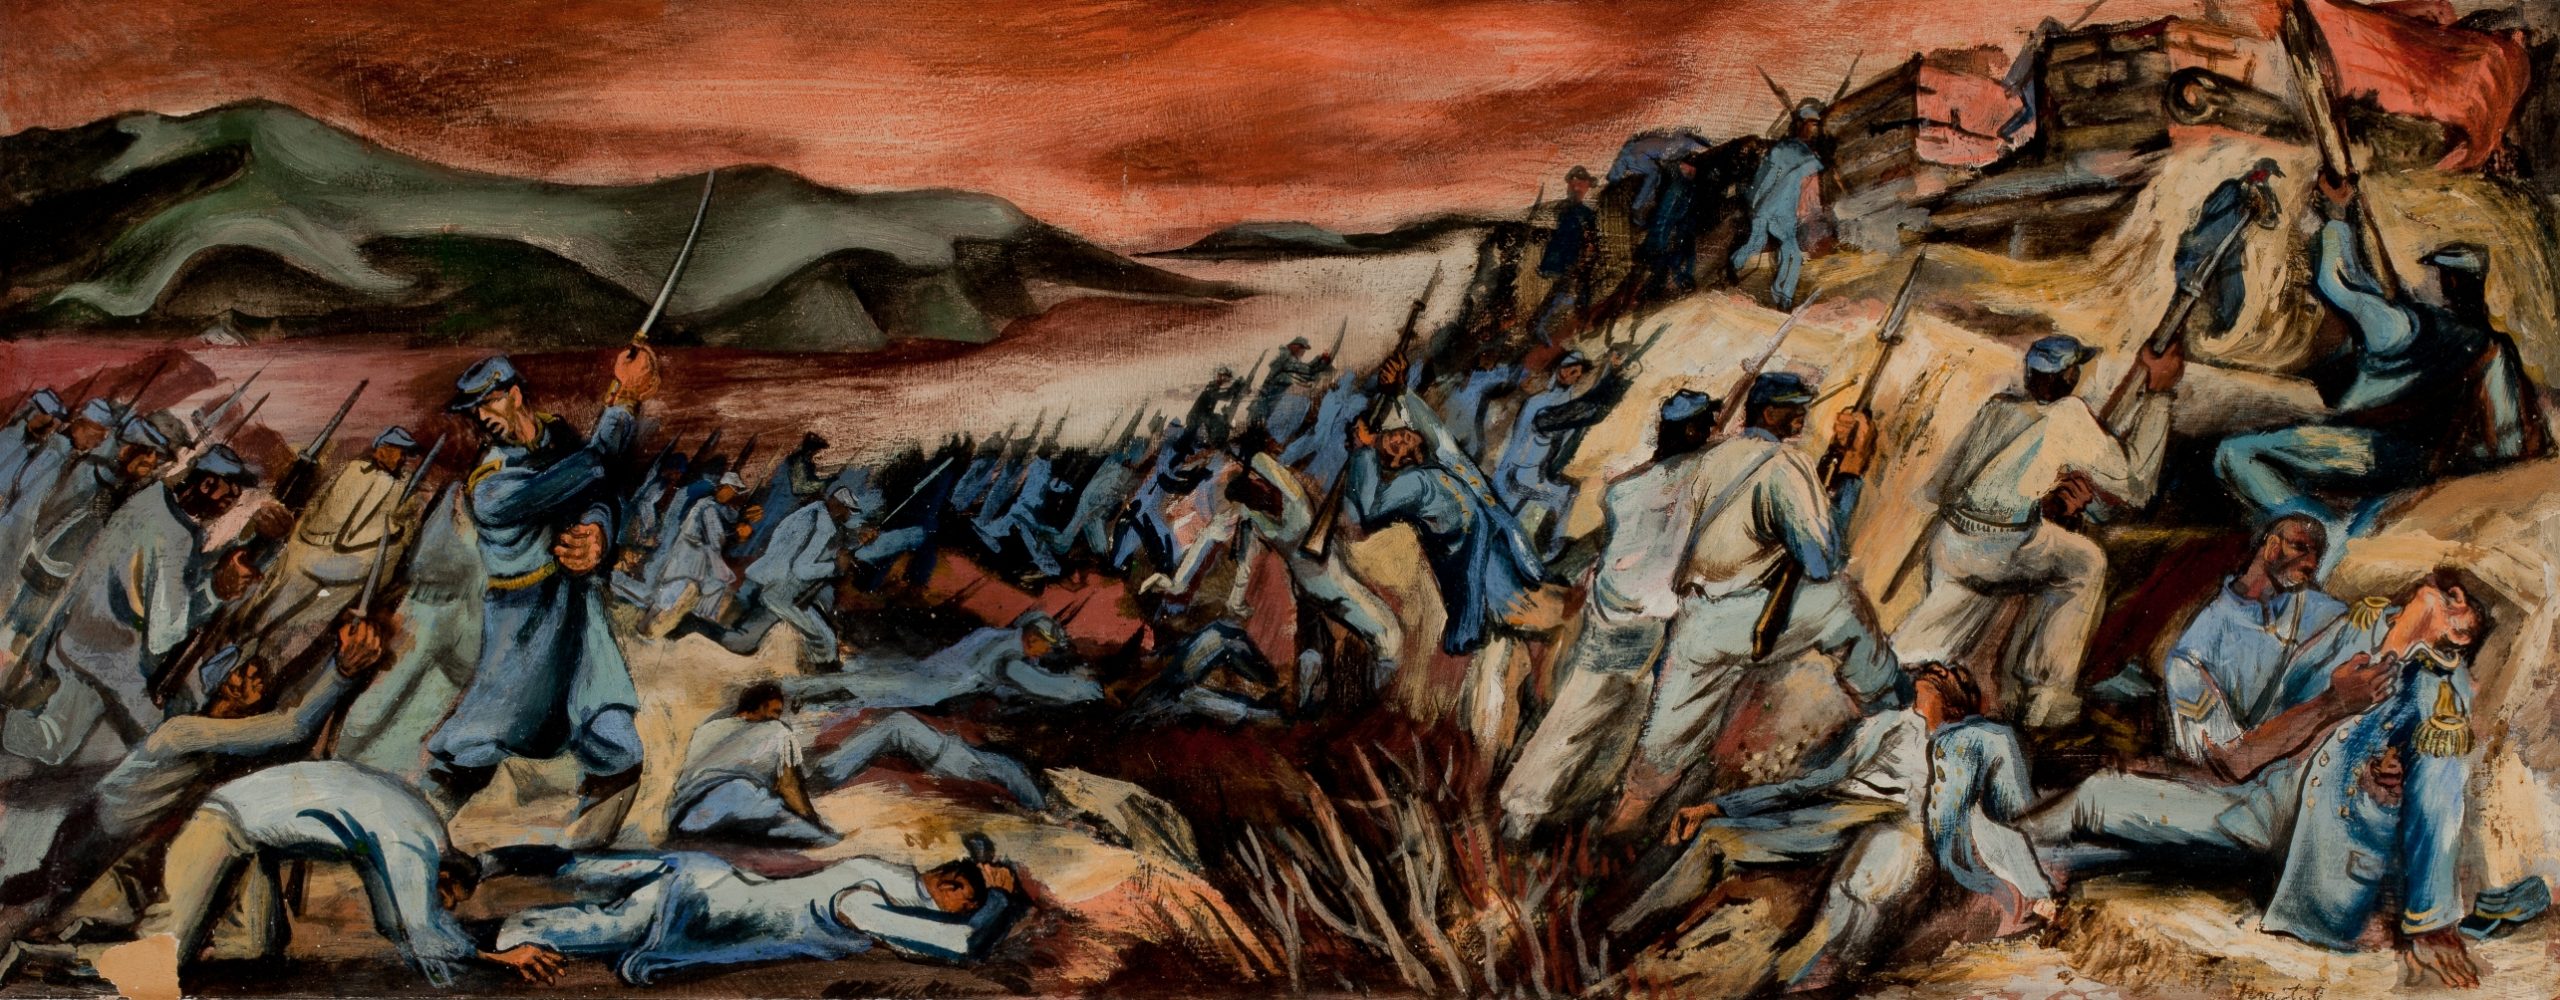 Martyl (Suzanne Schweig Langsdorf), <em>Col. Robert G. Shaw dying at the Battle of Fort Wagner</em>, 1940, gouache on masonite board, 28.81 x 19.75 inches (DuSable Museum of African American History)